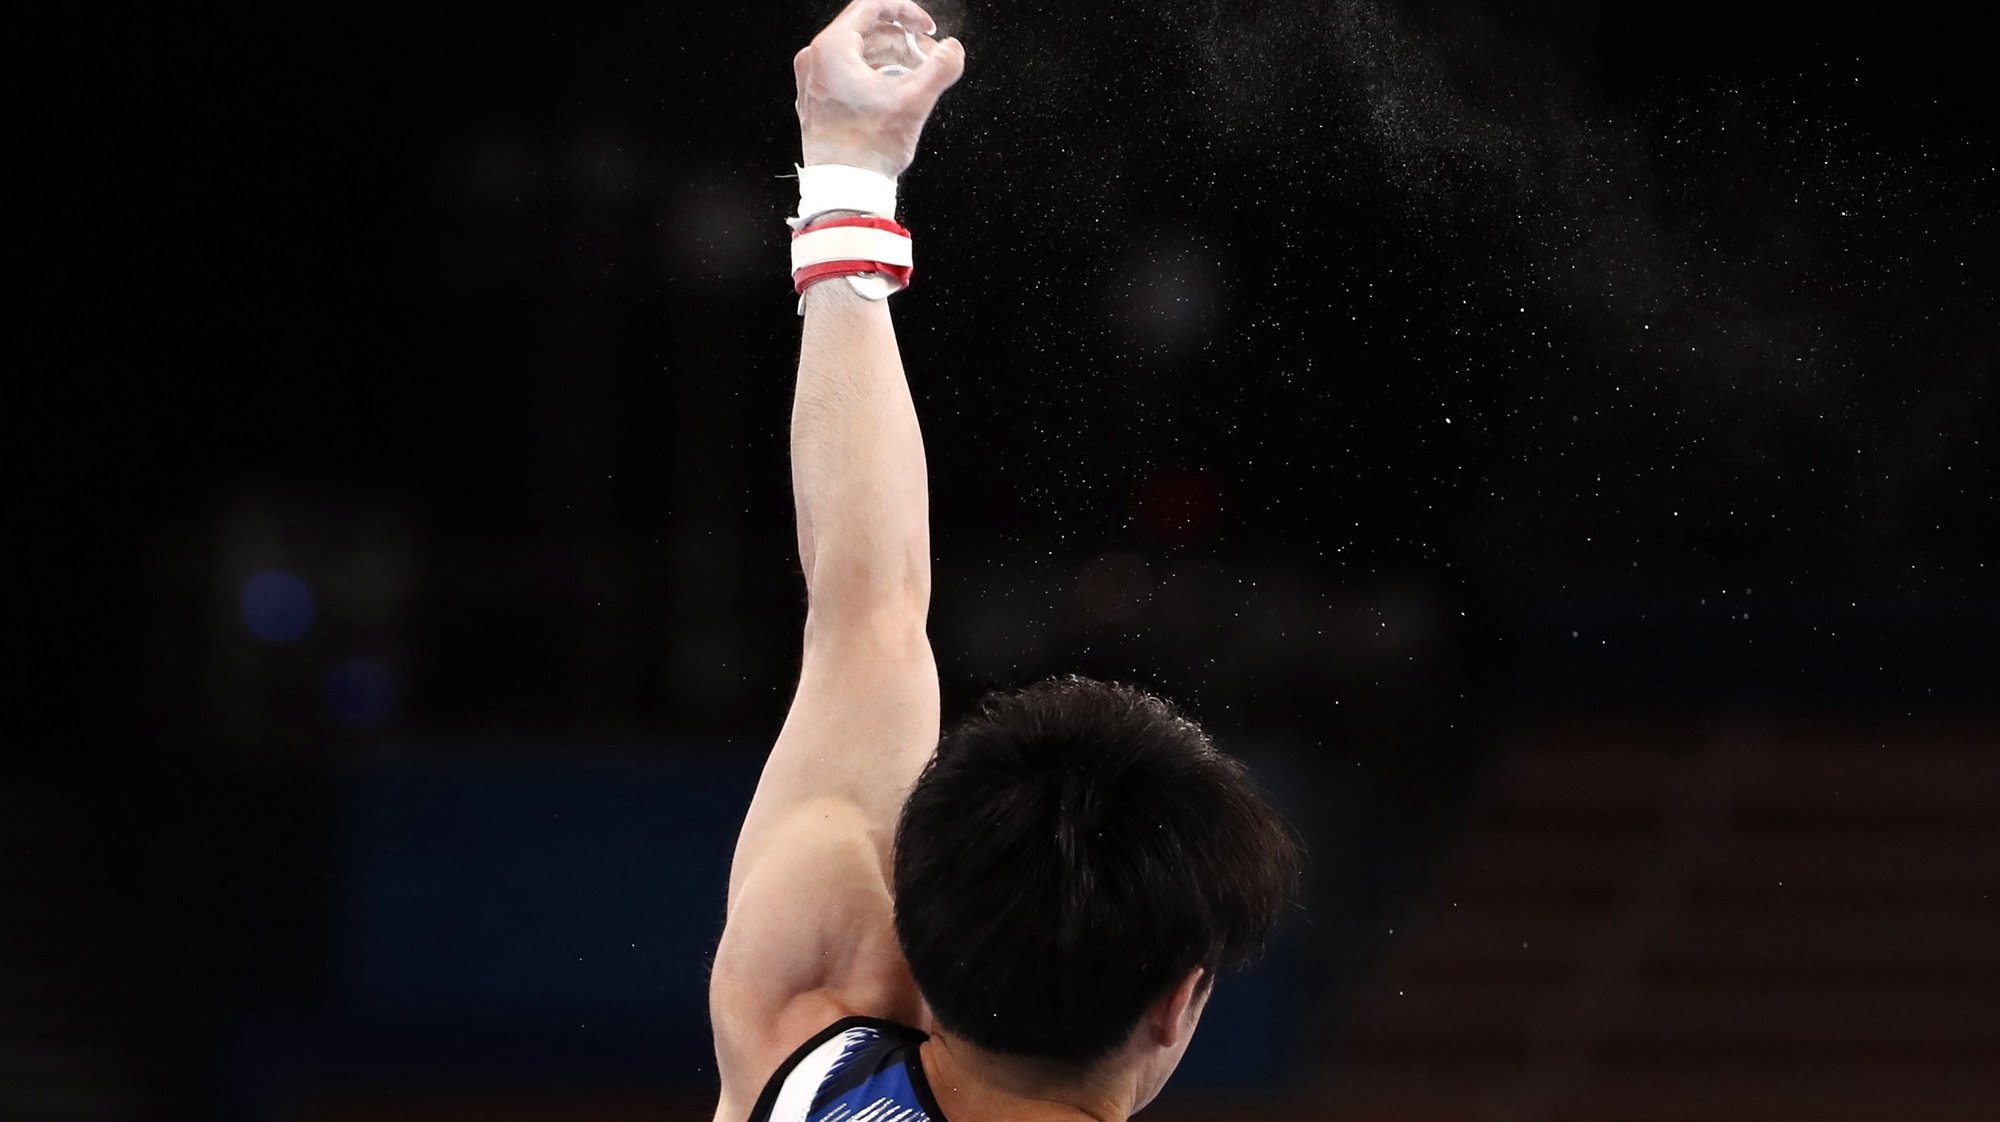 Kohei Uchimura of Japan falls down during the men&#039;s Horizontal Bar Qualification in Artistic Gymnastics events of the Tokyo 2020 Olympic Games at the Ariake Gymnastics Centre in Tokyo, Japan, 24 July 2021. EPA/TATYANA ZENKOVICH